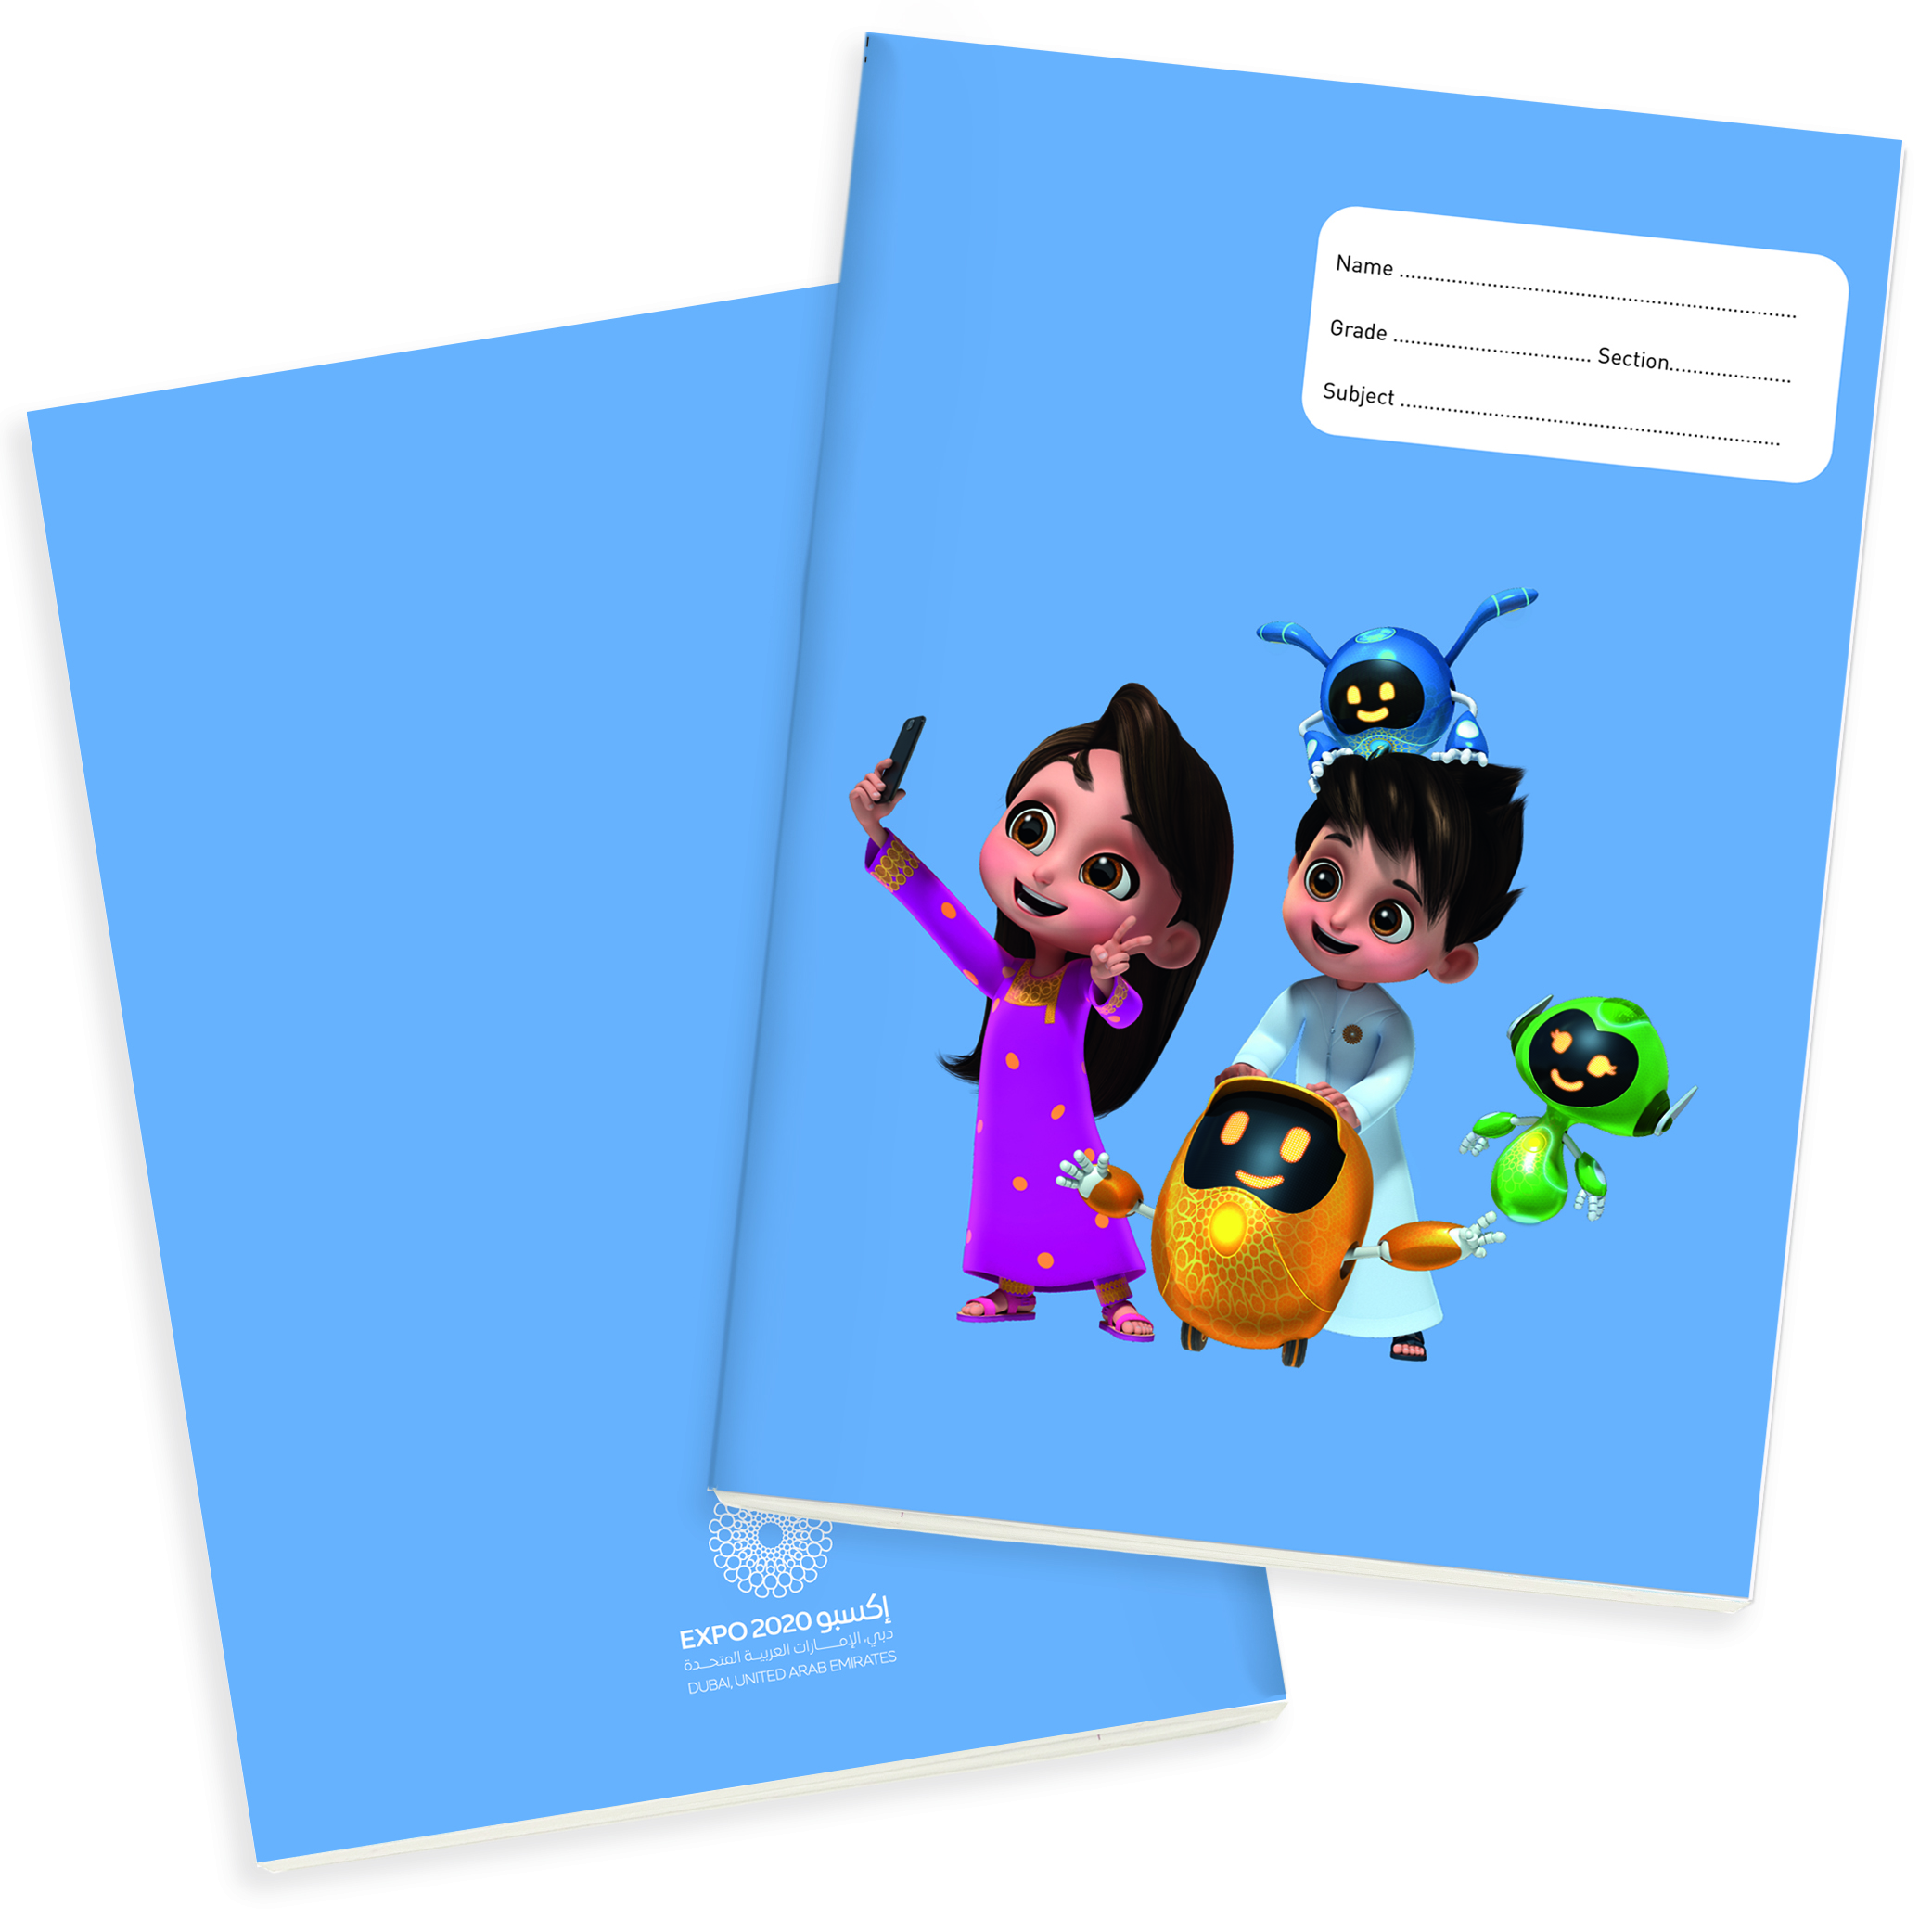 Expo 2020 Dubai Mascots A4 Exercise Books Pack of 4 - 96 Pages